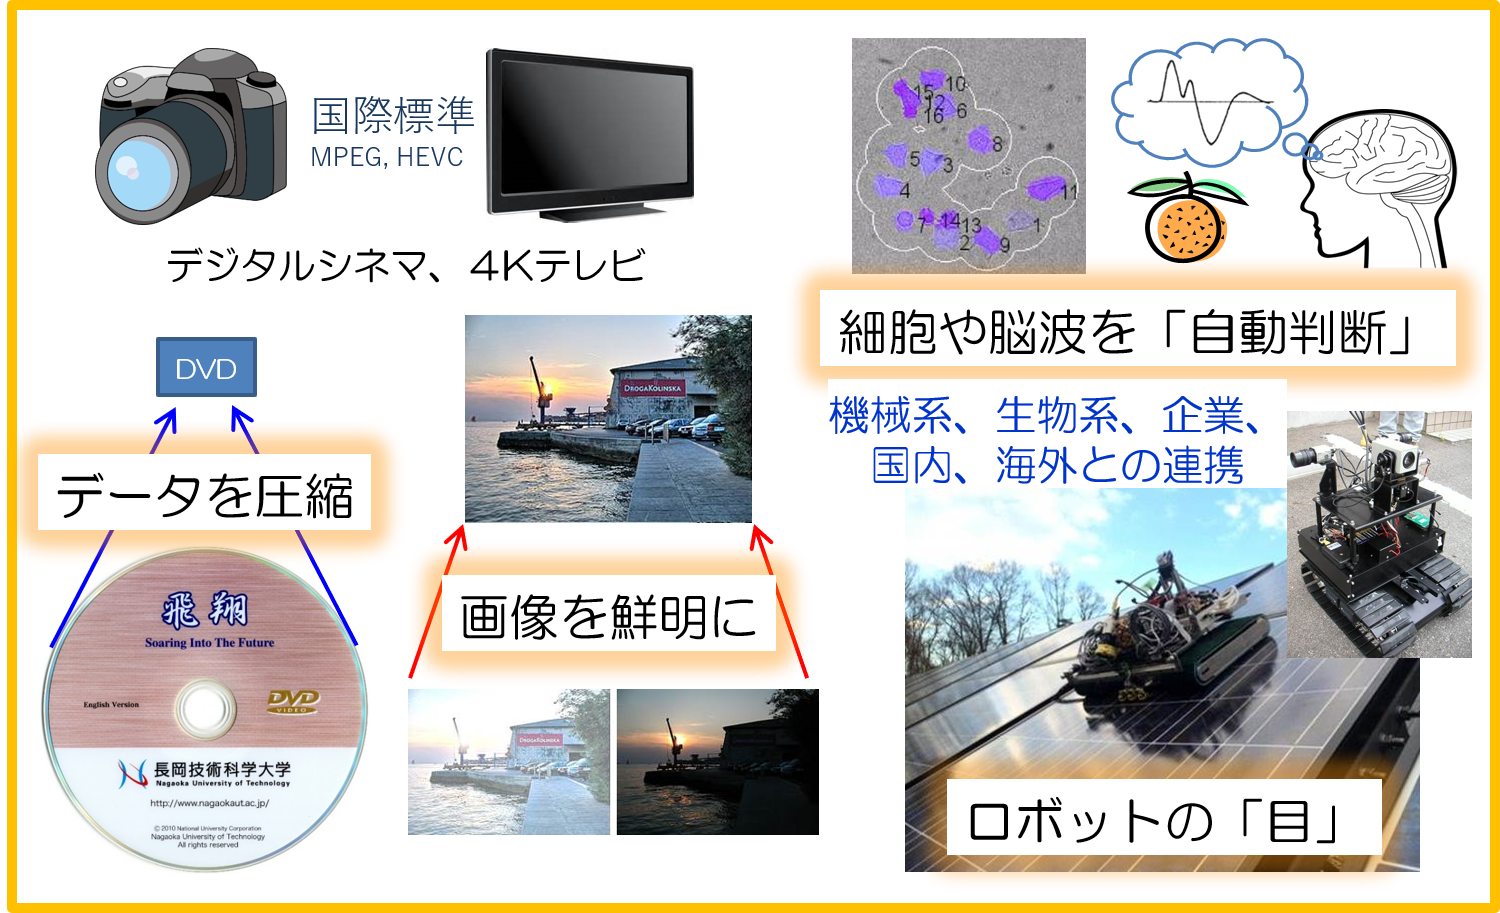 Examples of image processing technologies